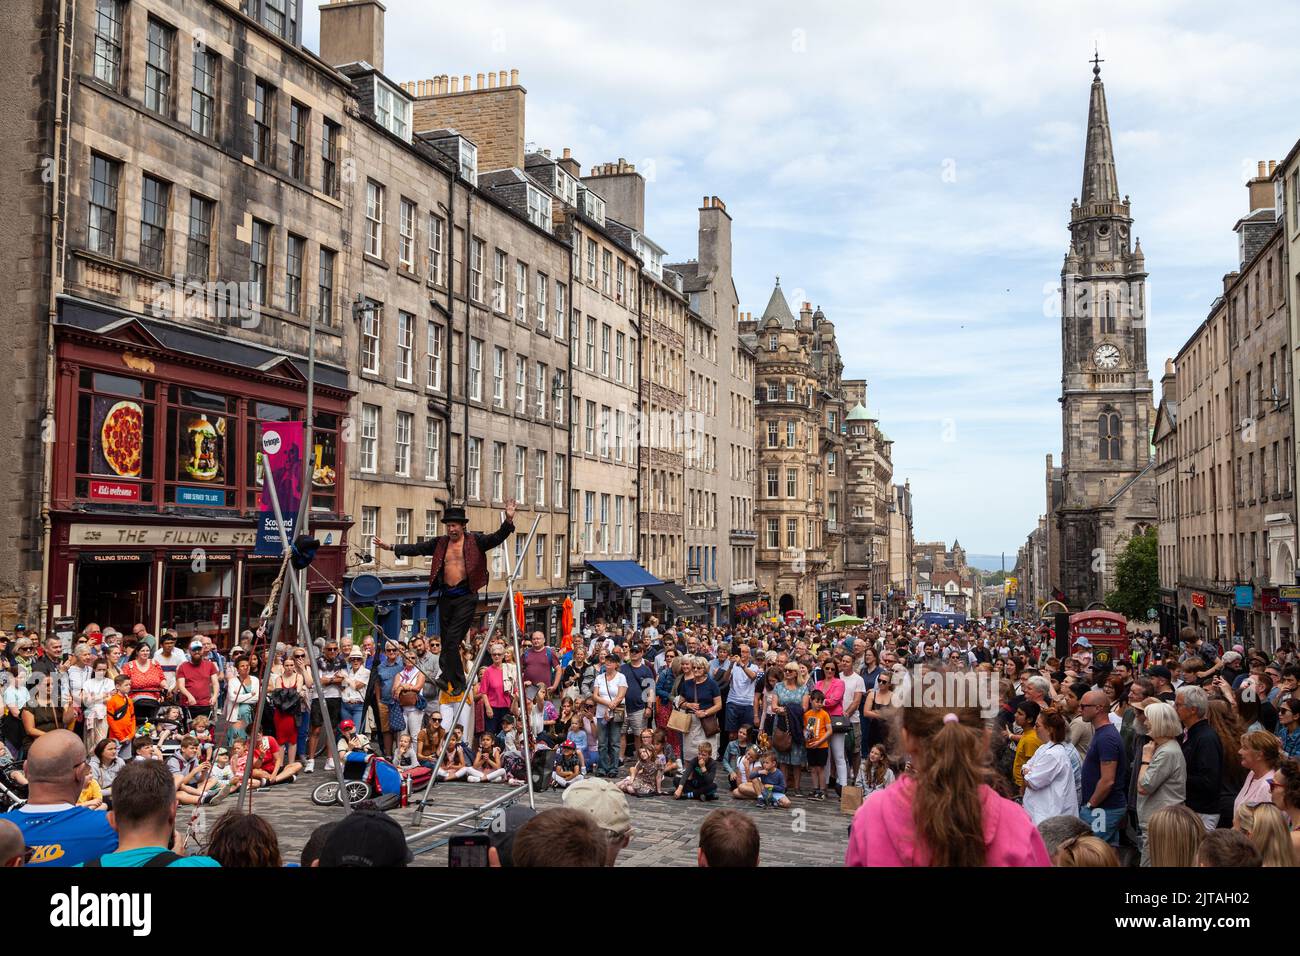 An Edinburgh Festival busker on The Royal Mile performing tightrope walking Stock Photo